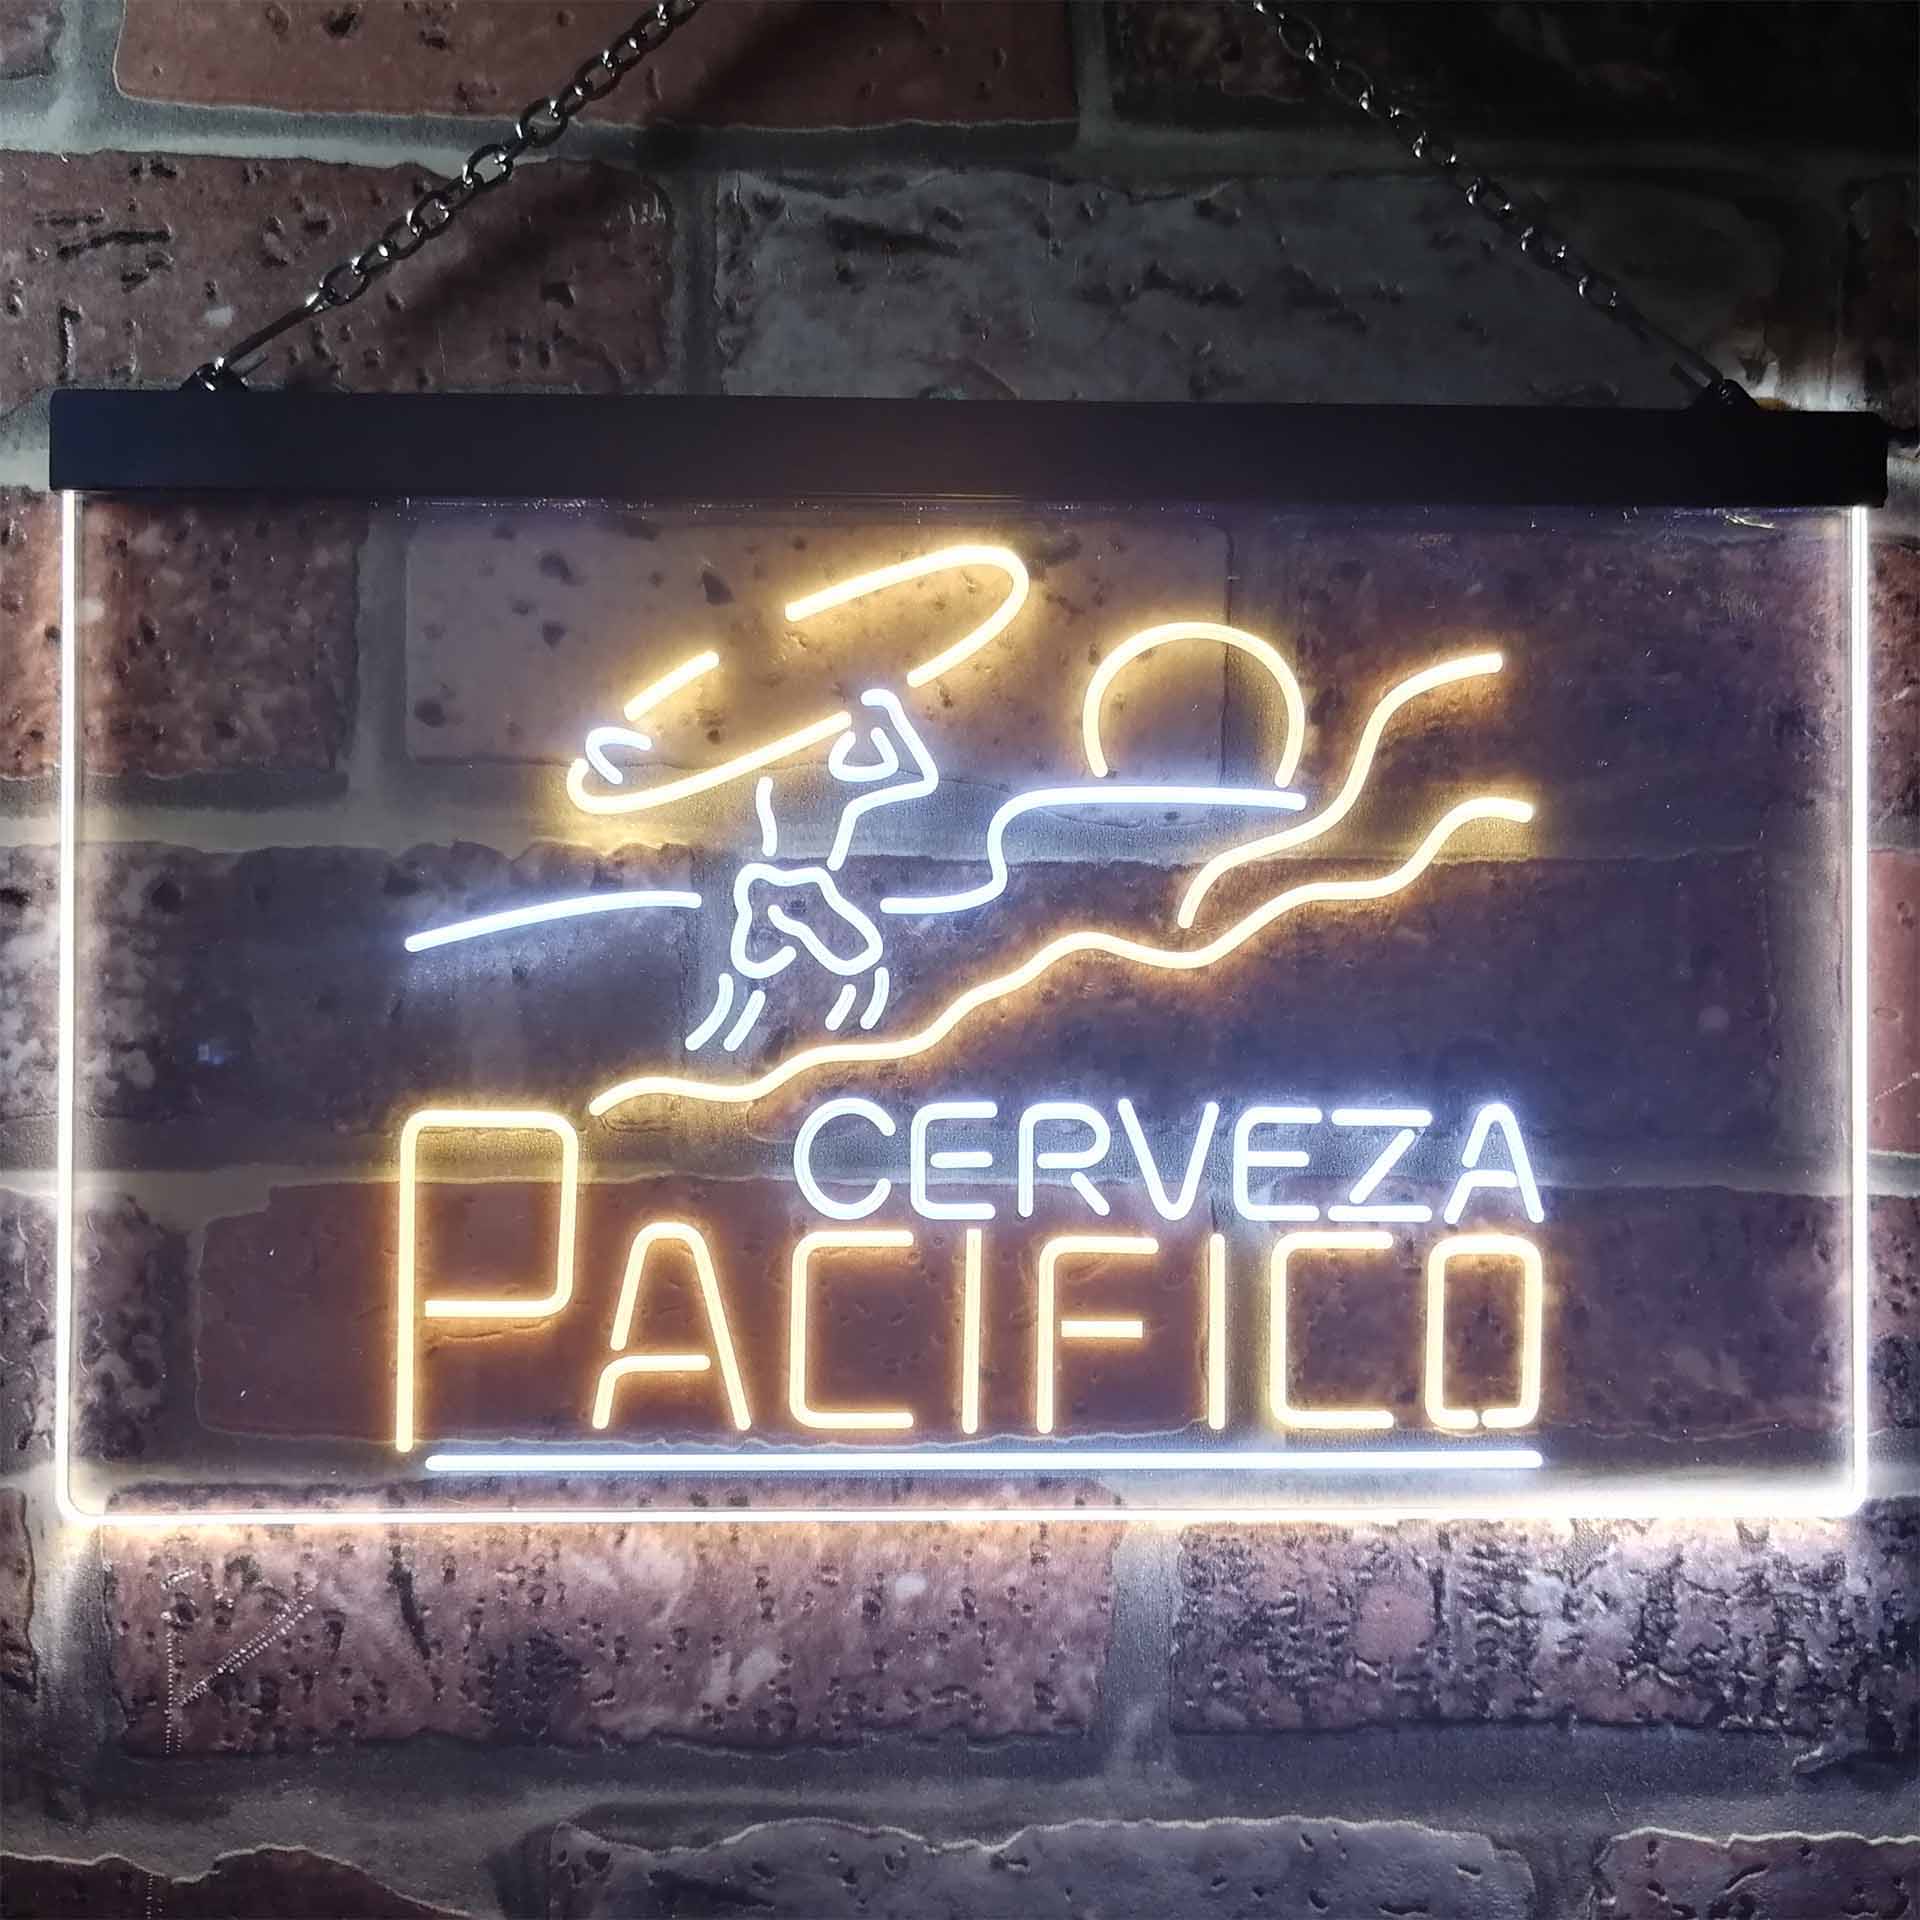 Pacifico Clara Mexican Cerveza Dual Color LED Neon Sign ProLedSign